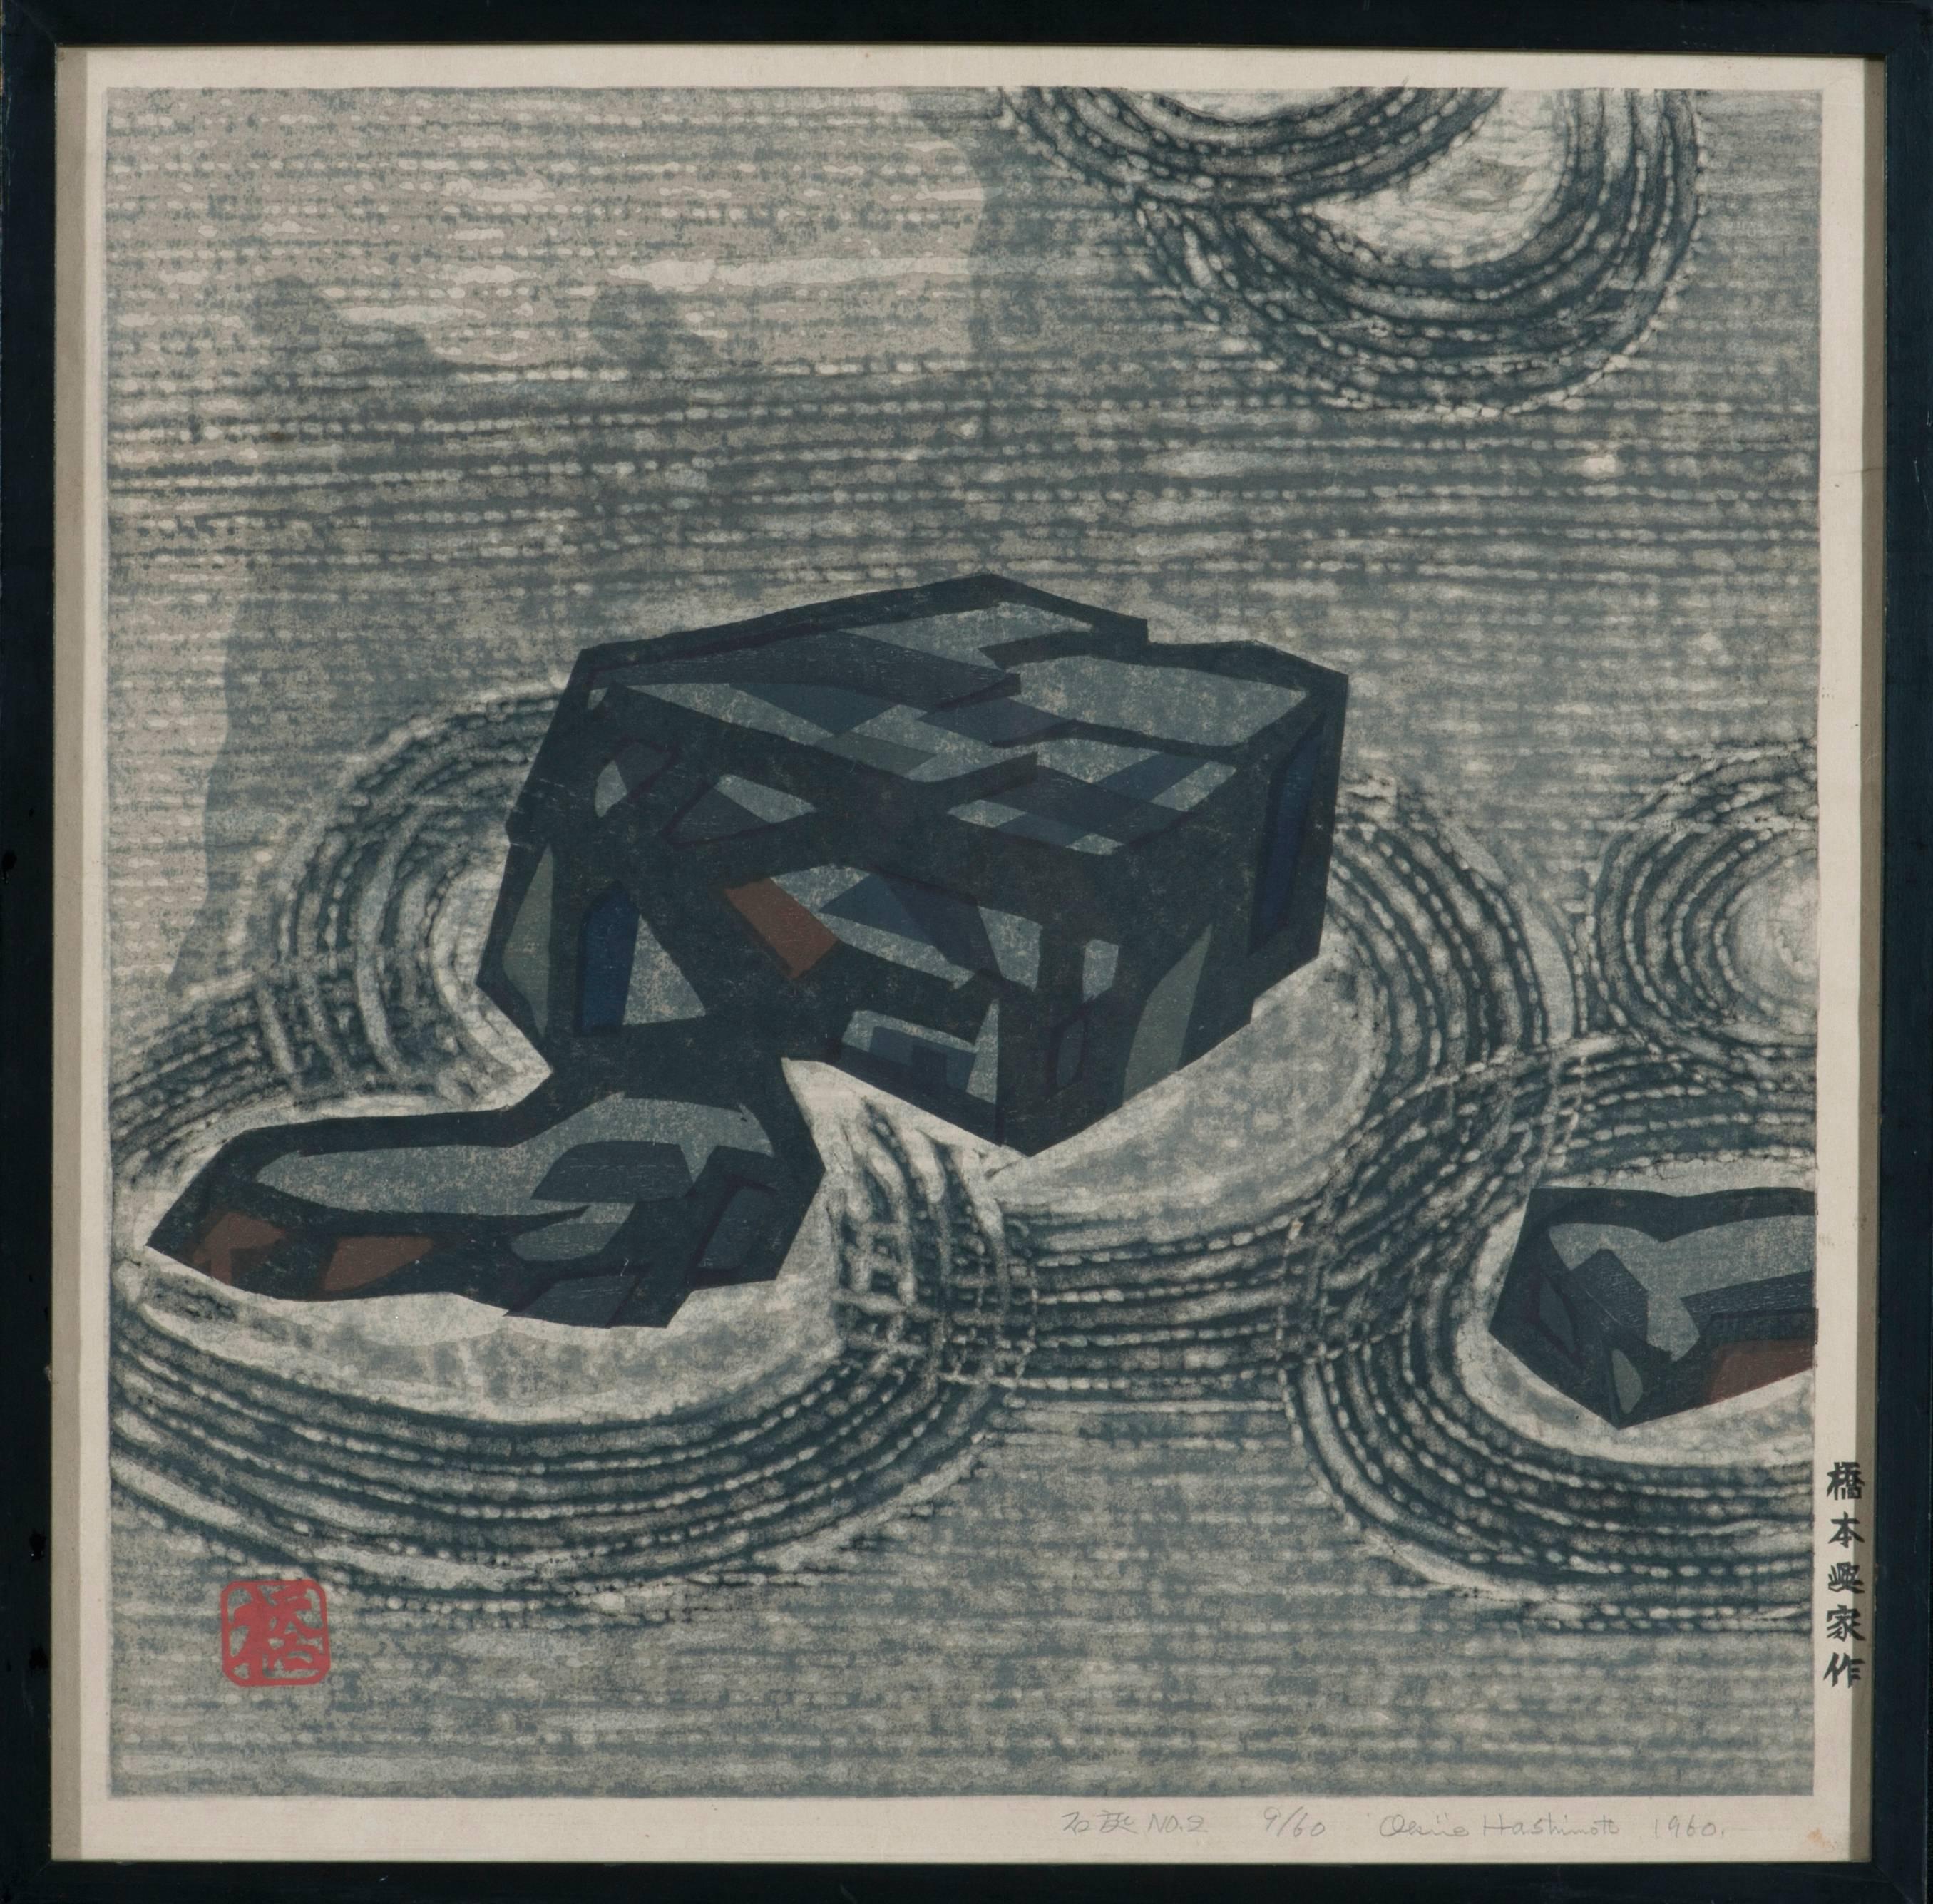 Contemporary Japanese block print by master print maker Okiie Hashimoto (1899-1993.). Self printed, the bottom margin is signed, titled in Kanji, dated 1960 and numbered 9/60. The artists red seal is at lower left. Print is framed and behind glass.